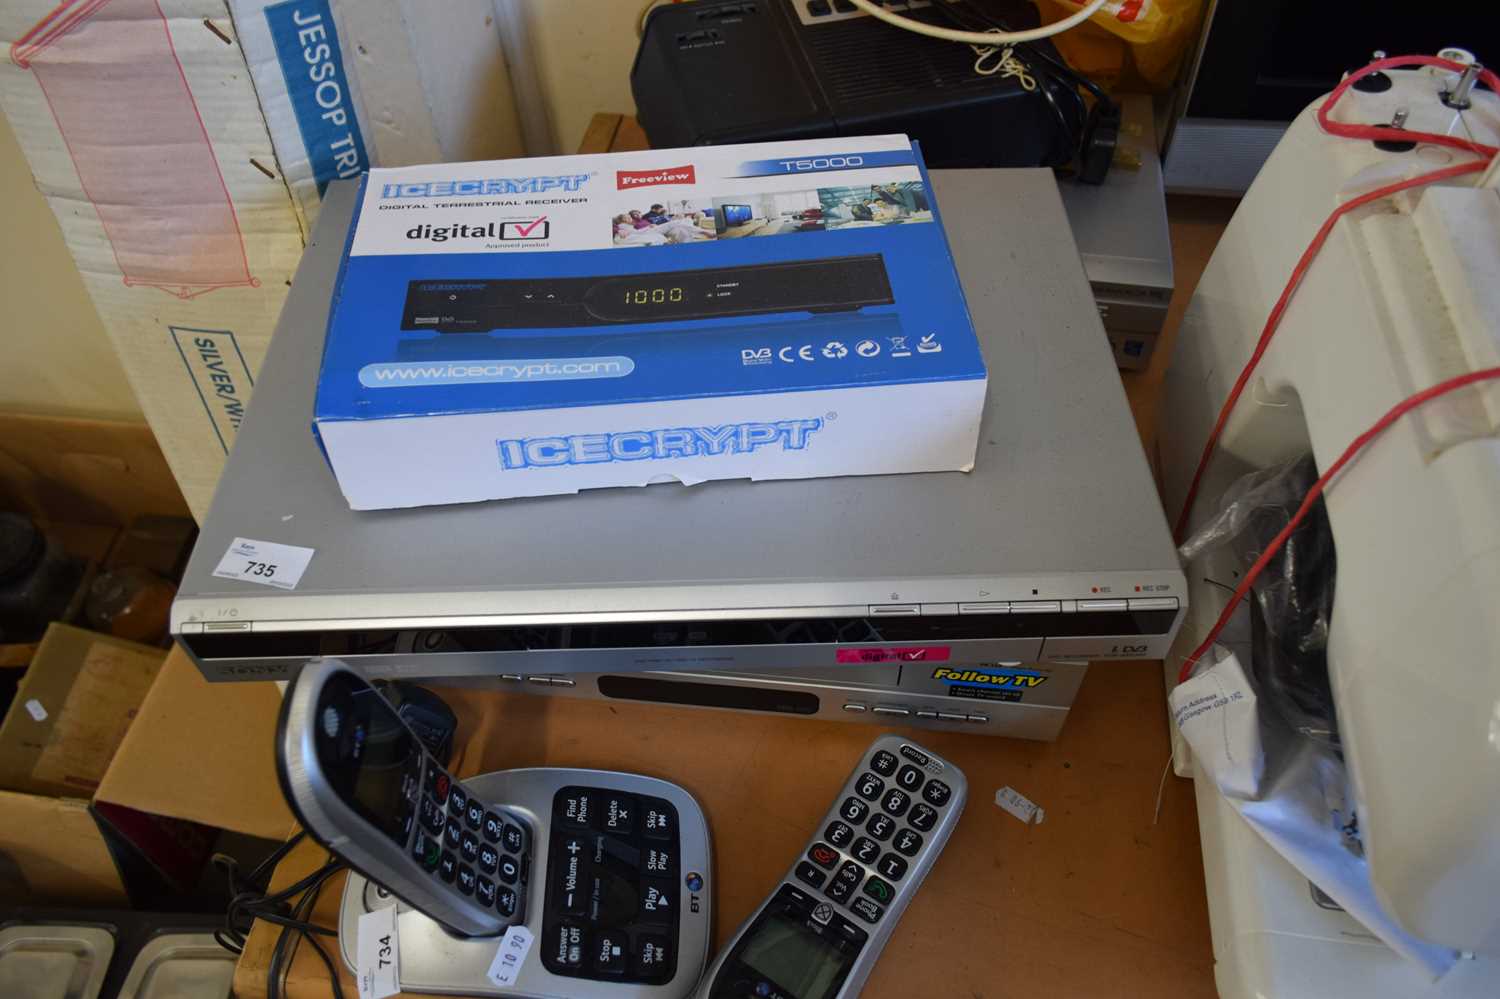 DIGITAL TV RECEIVER, A SONY DVD PLAYER AND A PHILIPS VIDEO PLAYER